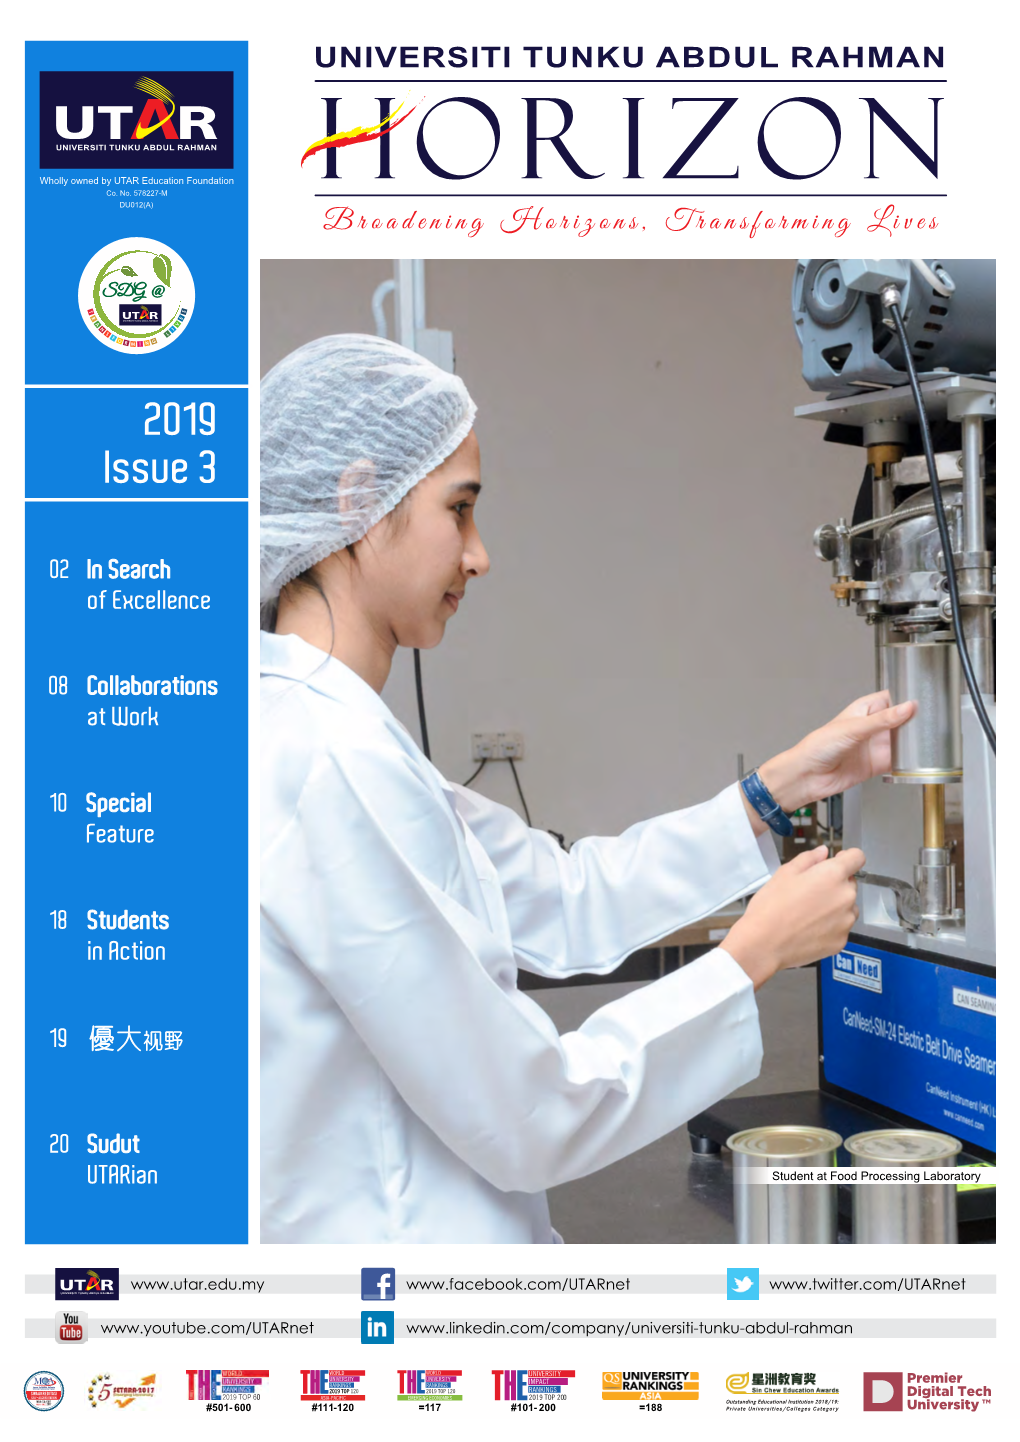 2019 Issue 3